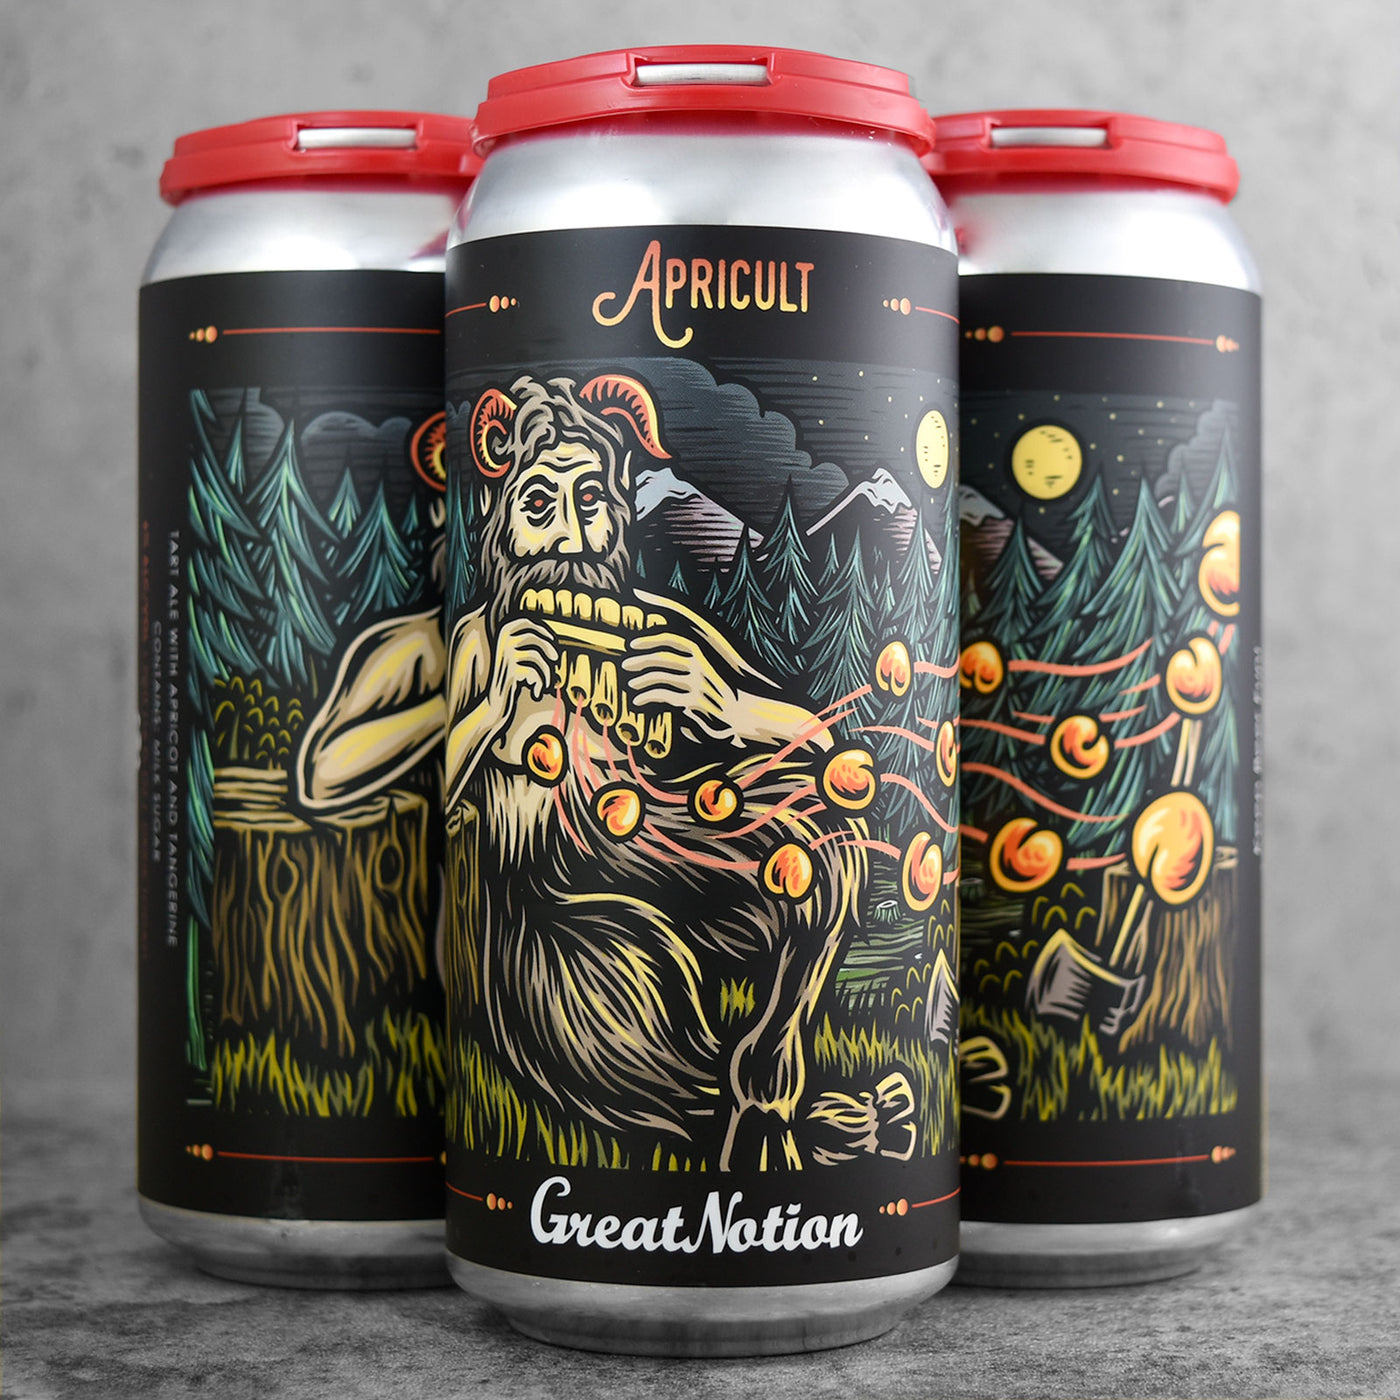 Great Notion Apricult